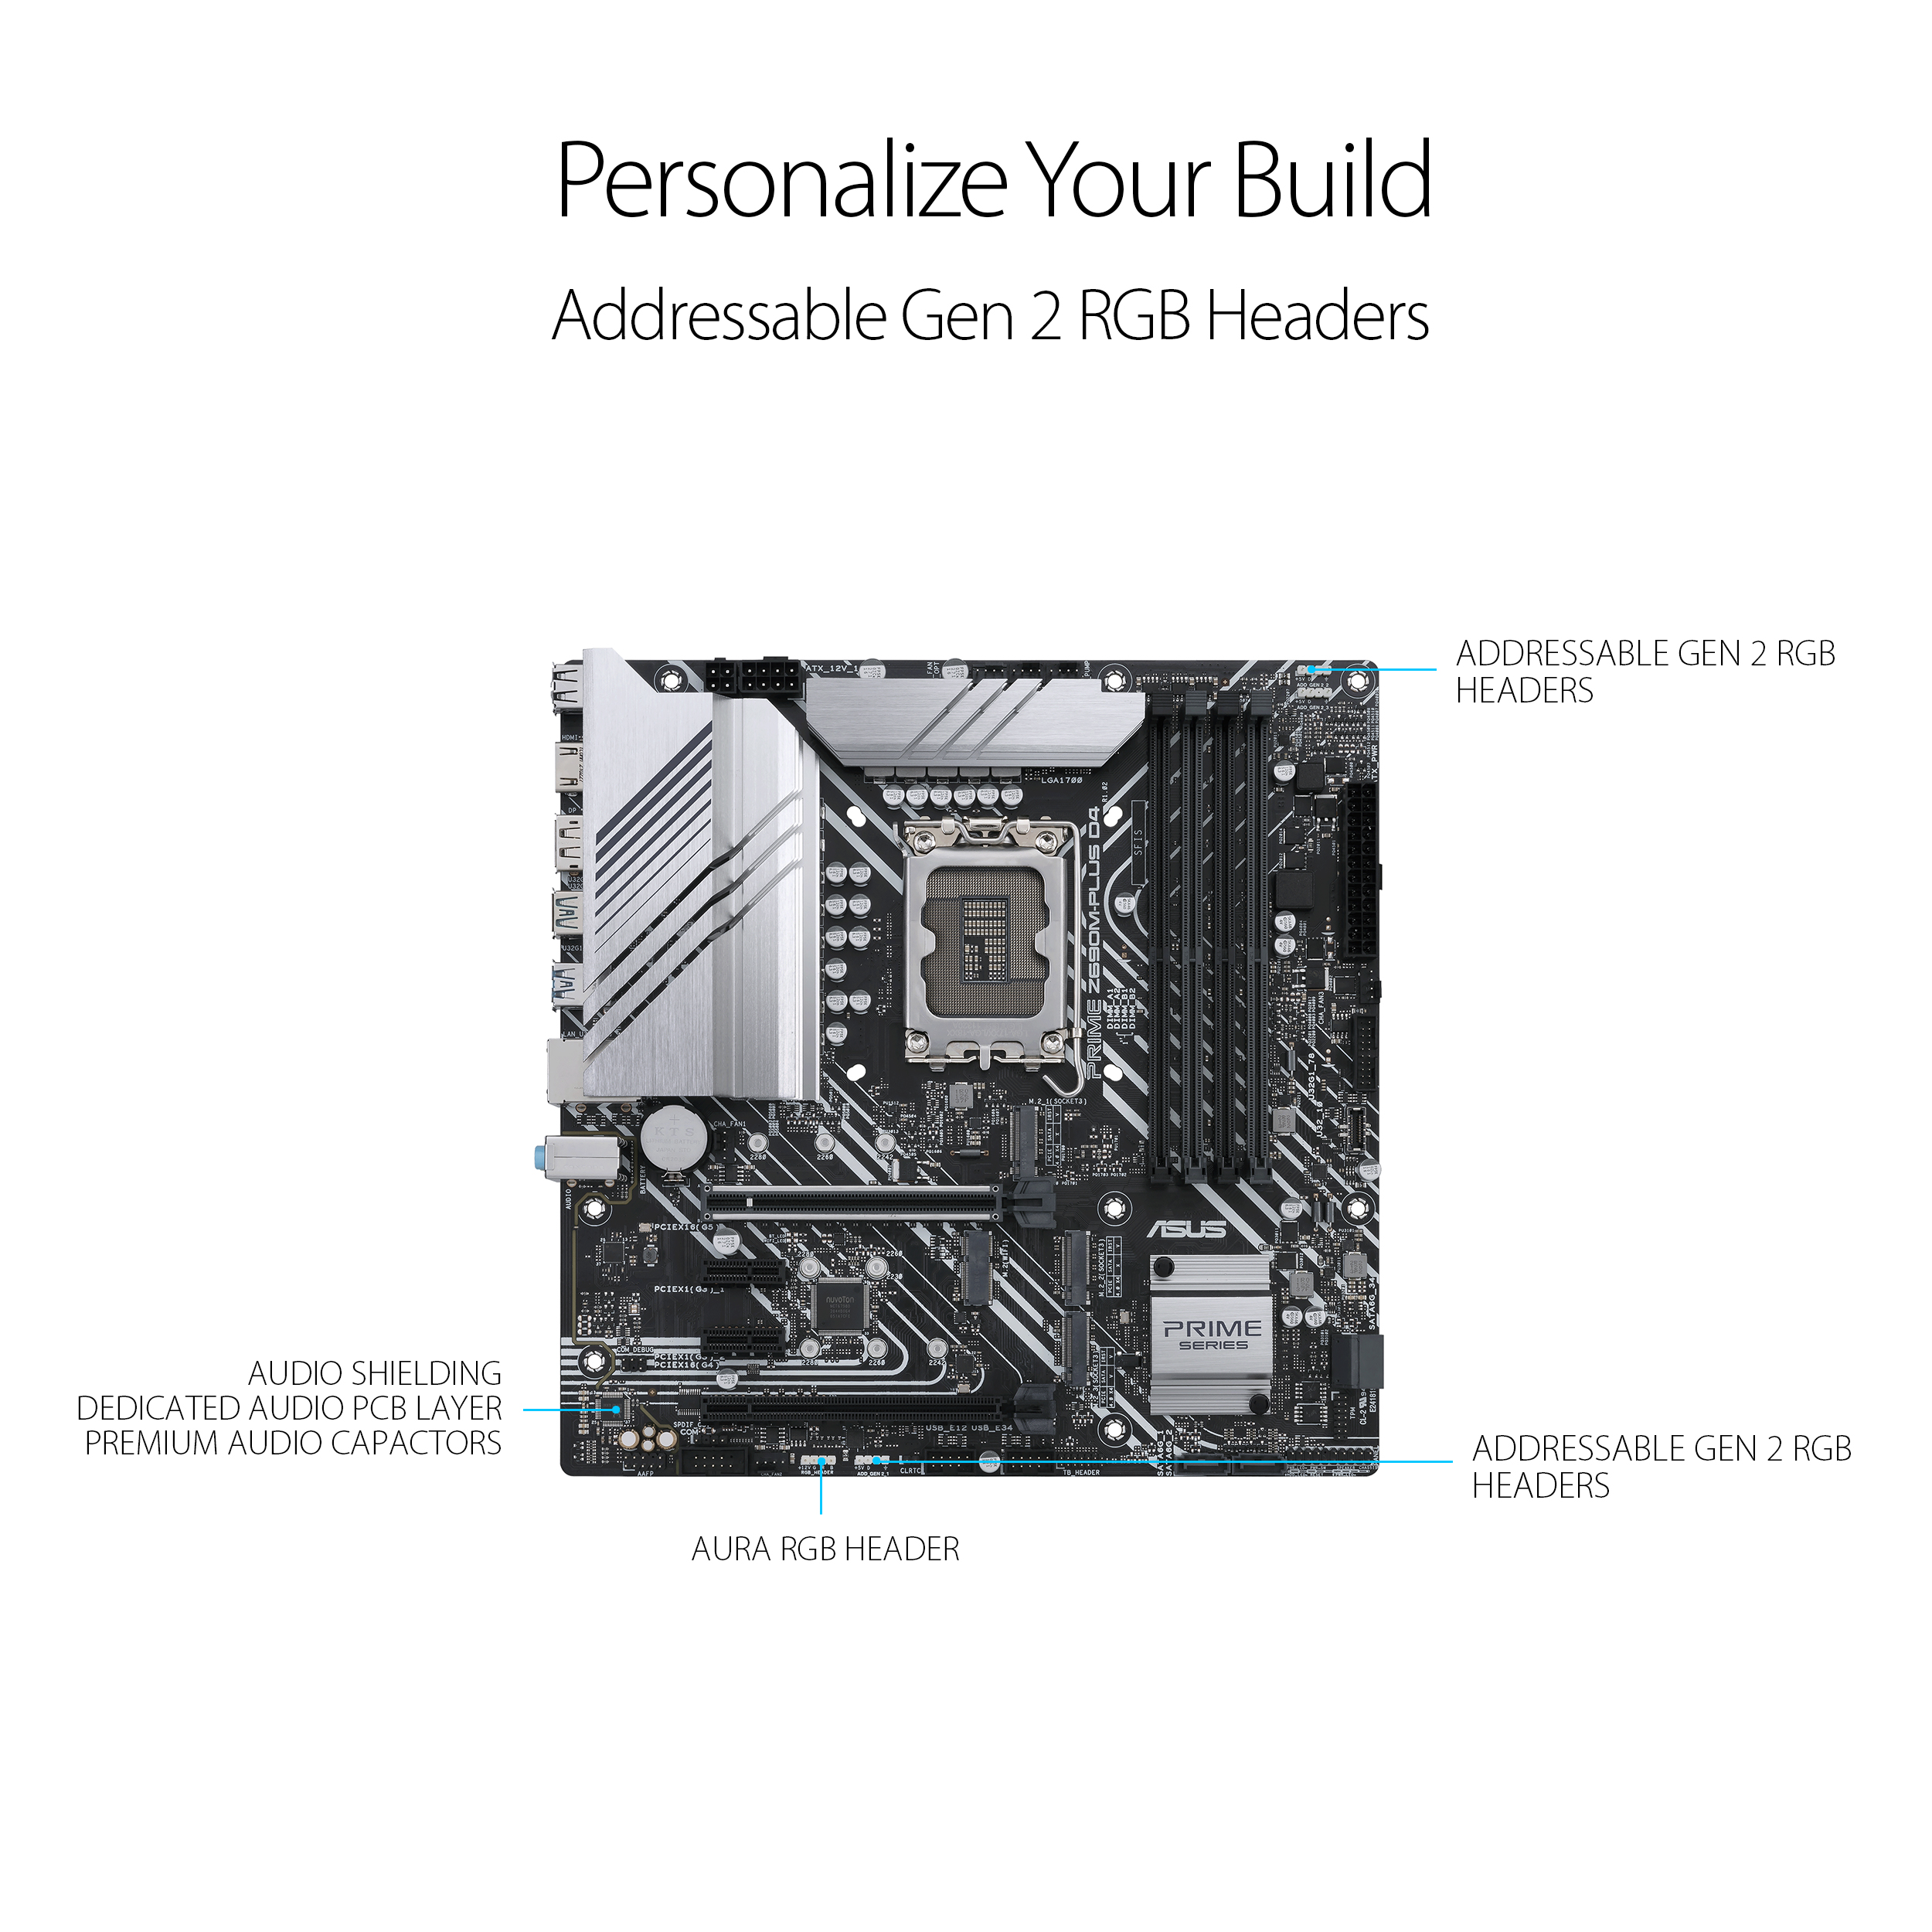 A large marketing image providing additional information about the product ASUS Prime Z690M-PLUS DDR4 LGA1700 mATX Desktop Motherboard - Additional alt info not provided